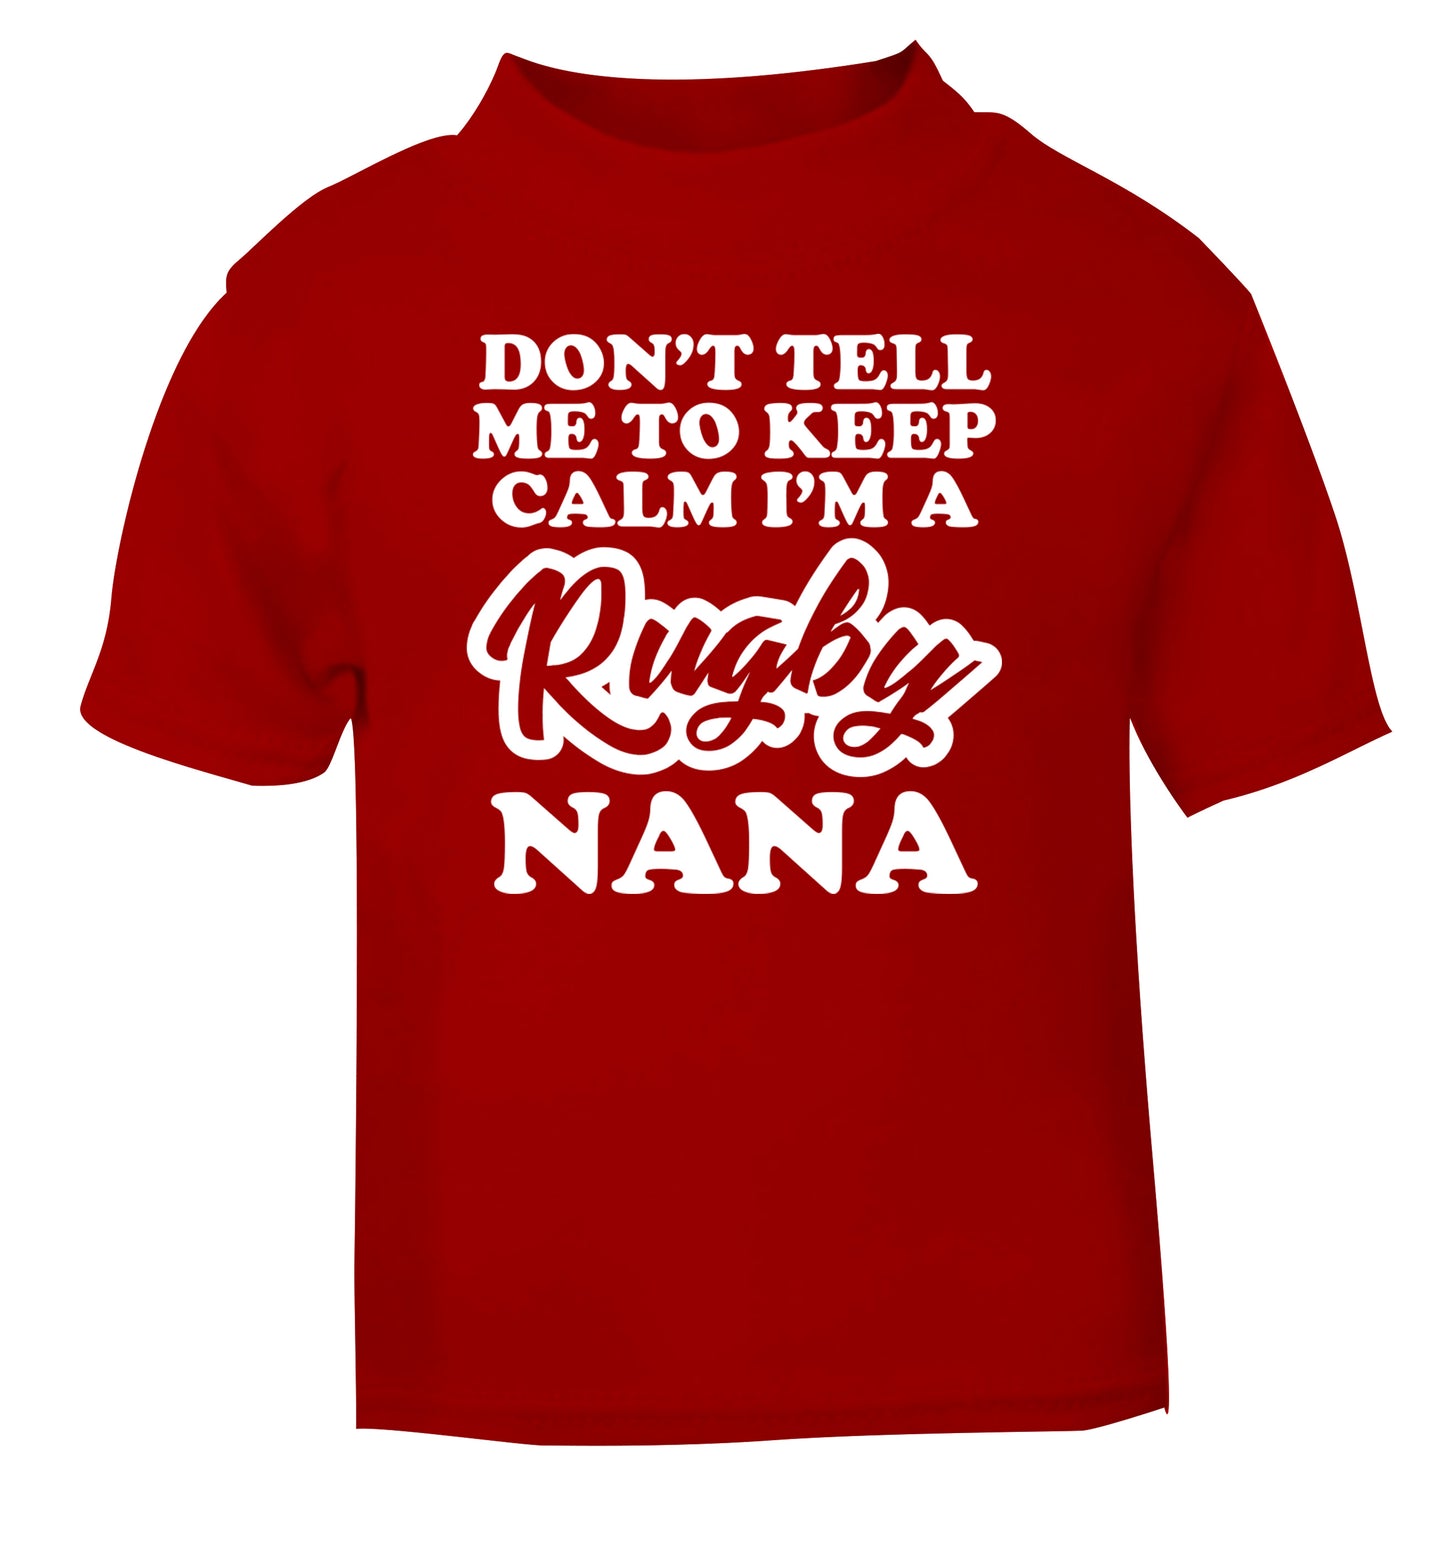 Don't tell me to keep calm I'm a rugby nana red Baby Toddler Tshirt 2 Years